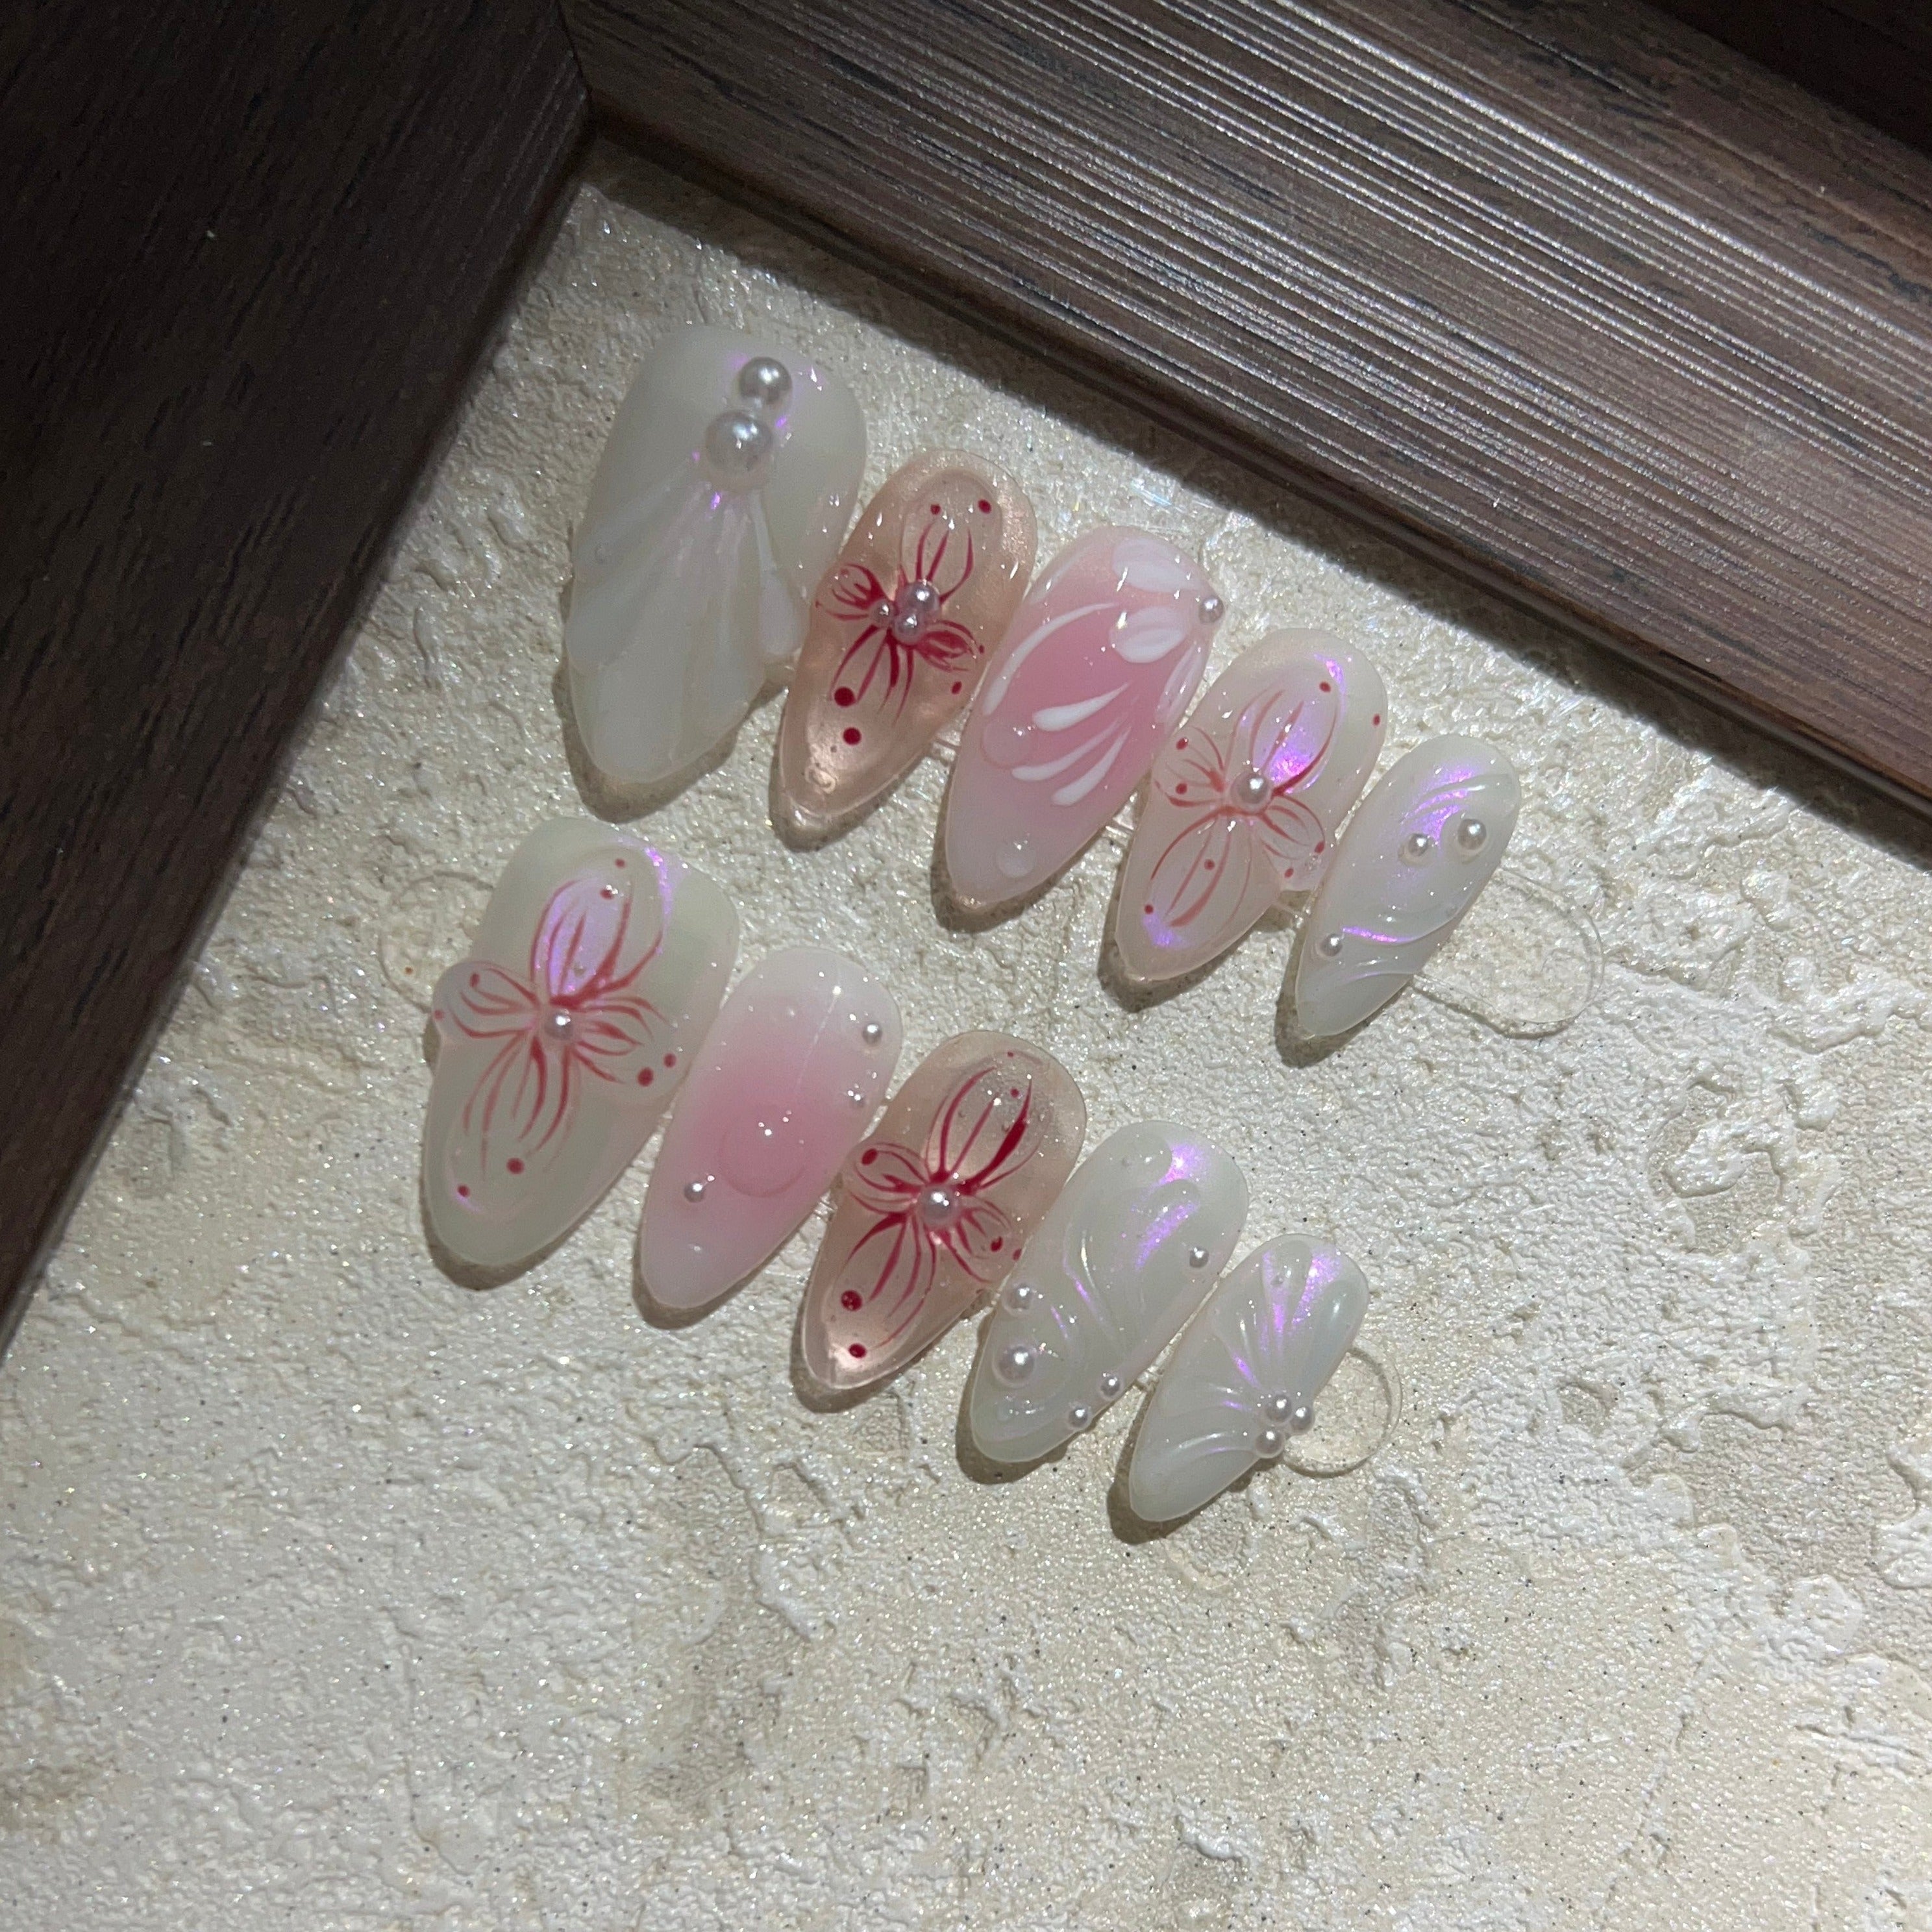 SPRING-TEN PIECES OF HANDCRAFTED PRESS ON NAIL